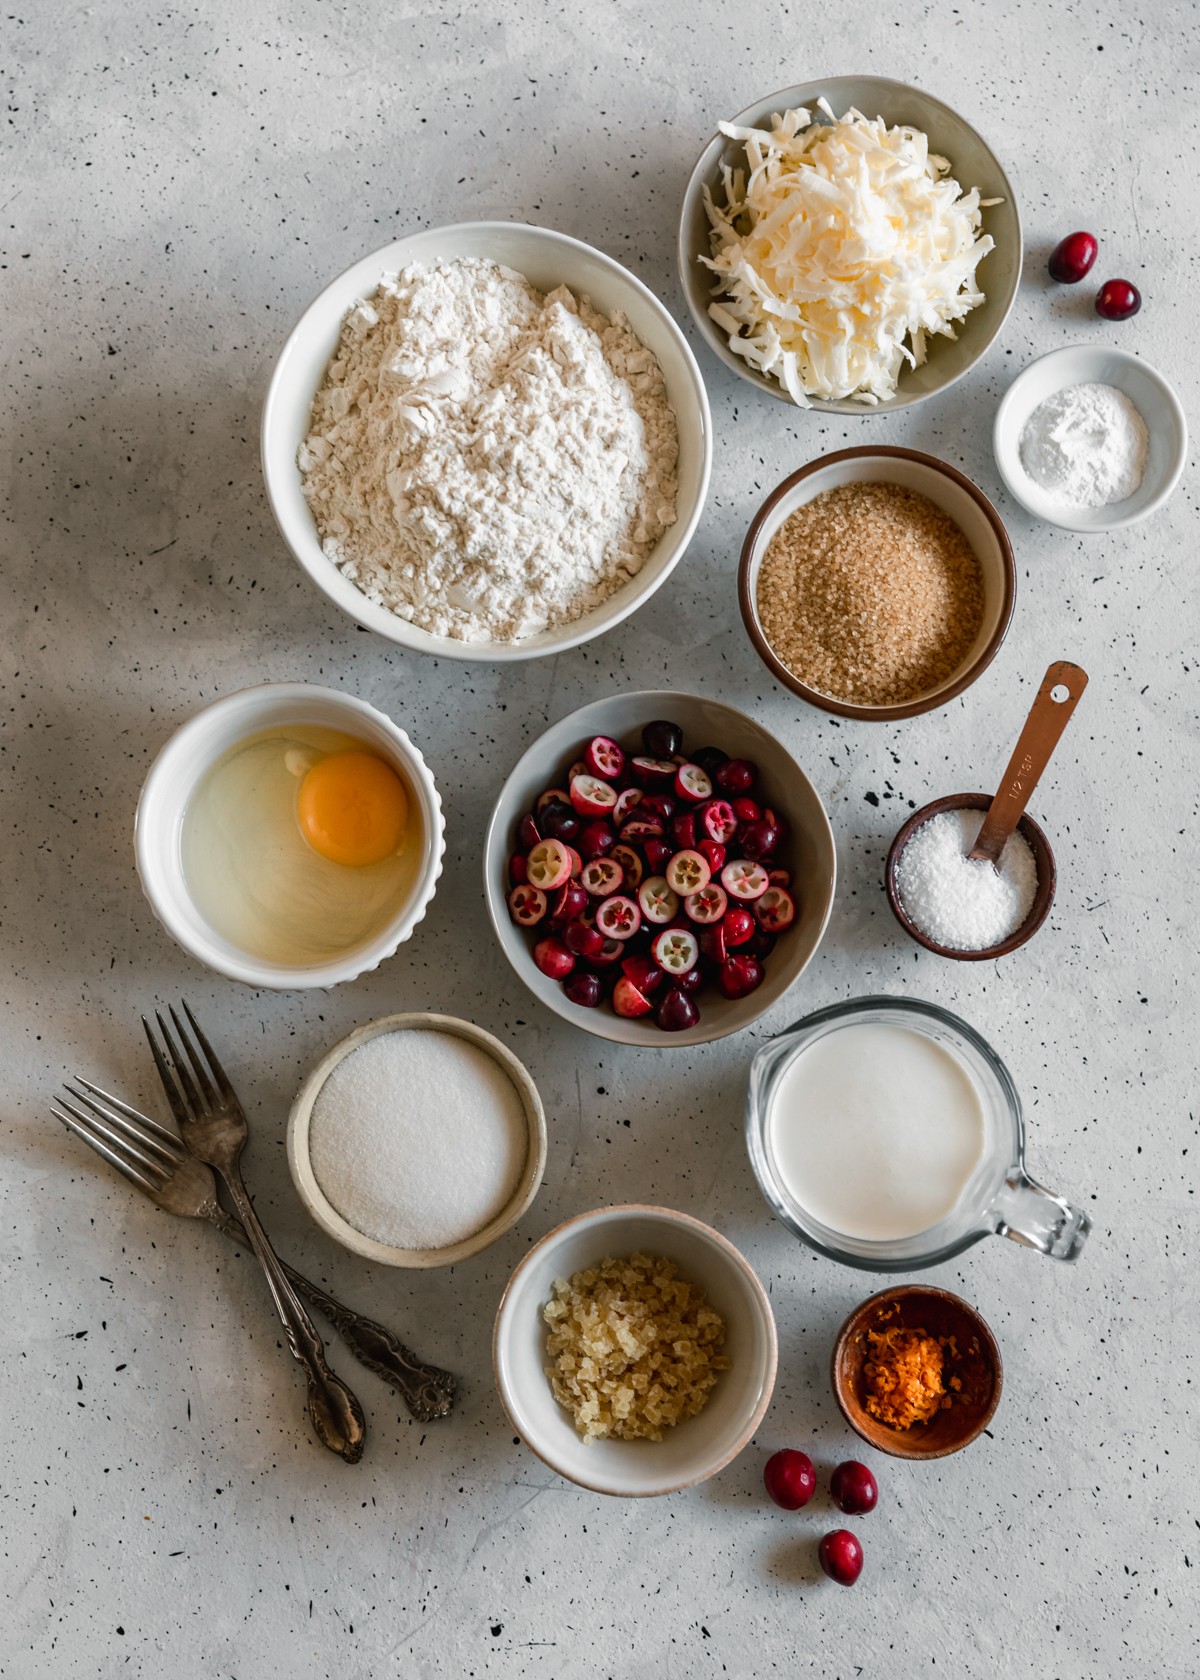 An overhead image of various white and grey bowls with baking ingredients, a grey bowl of cranberries, two vintage forks, and a wood bowl of citrus zest on a grey table.